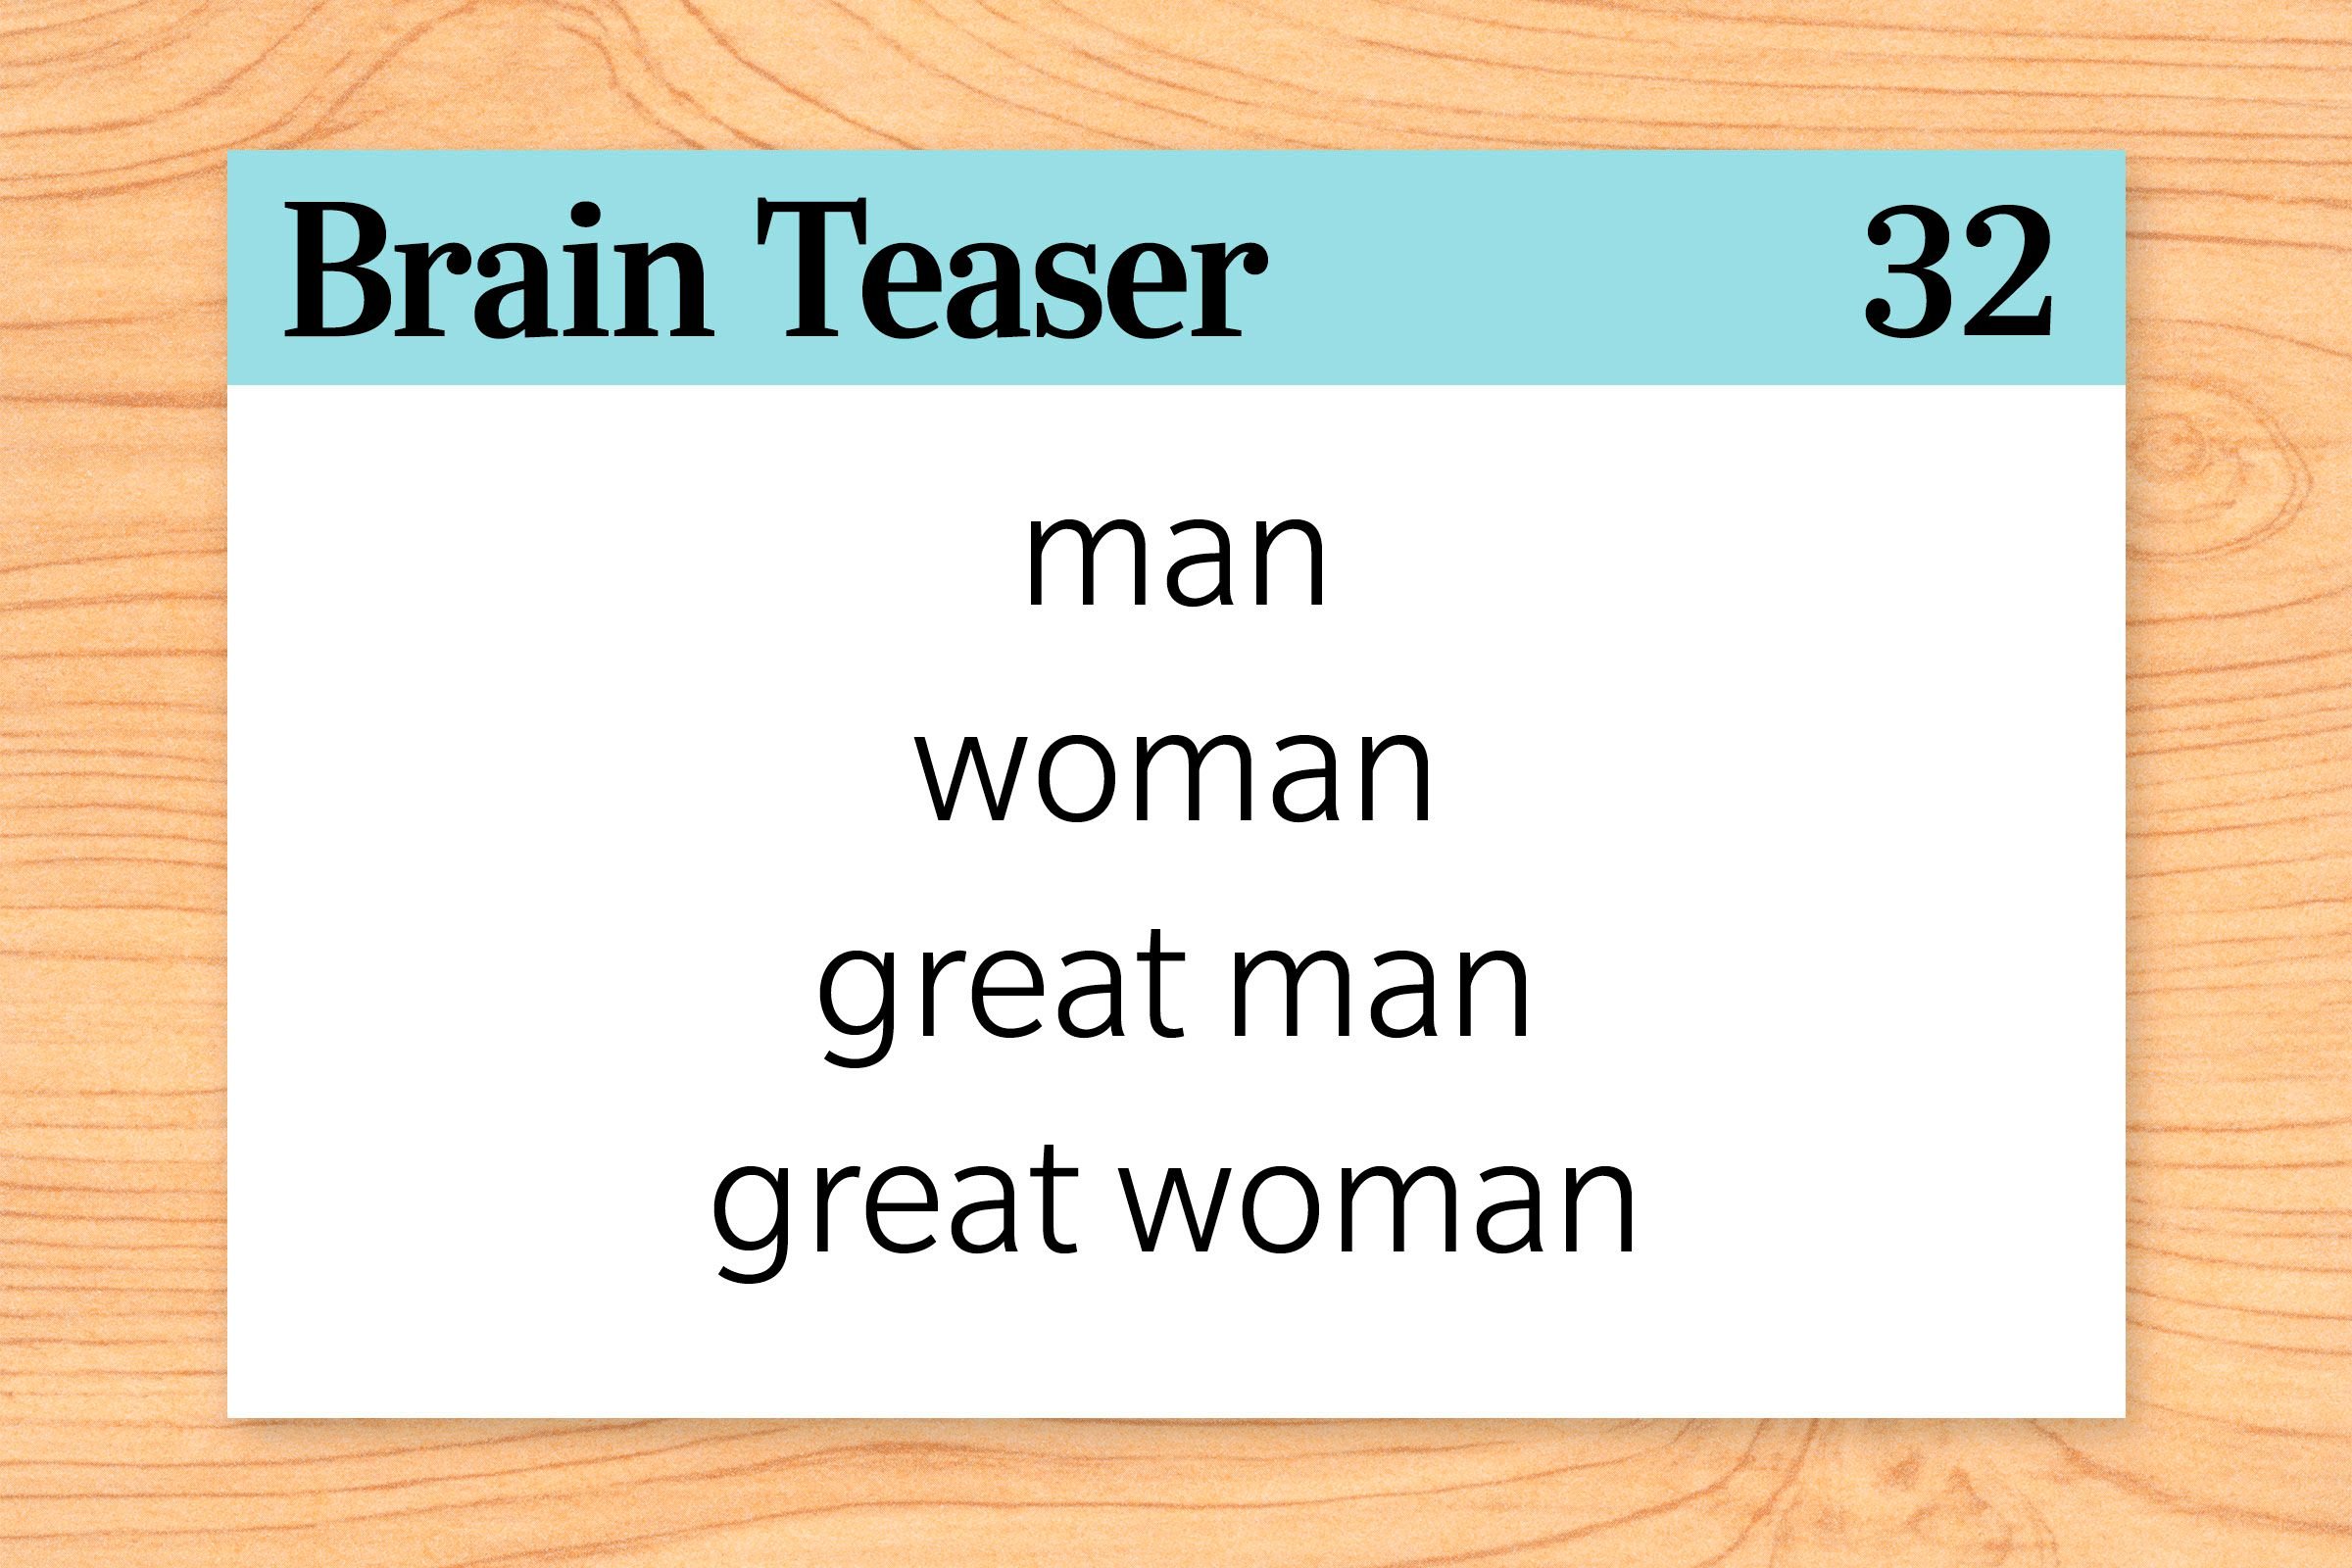 There is a word in the English language in which the first two letters signify a male, the first three letters signify a female, the first four signify a great man, and the whole word, a great woman. What is the word?